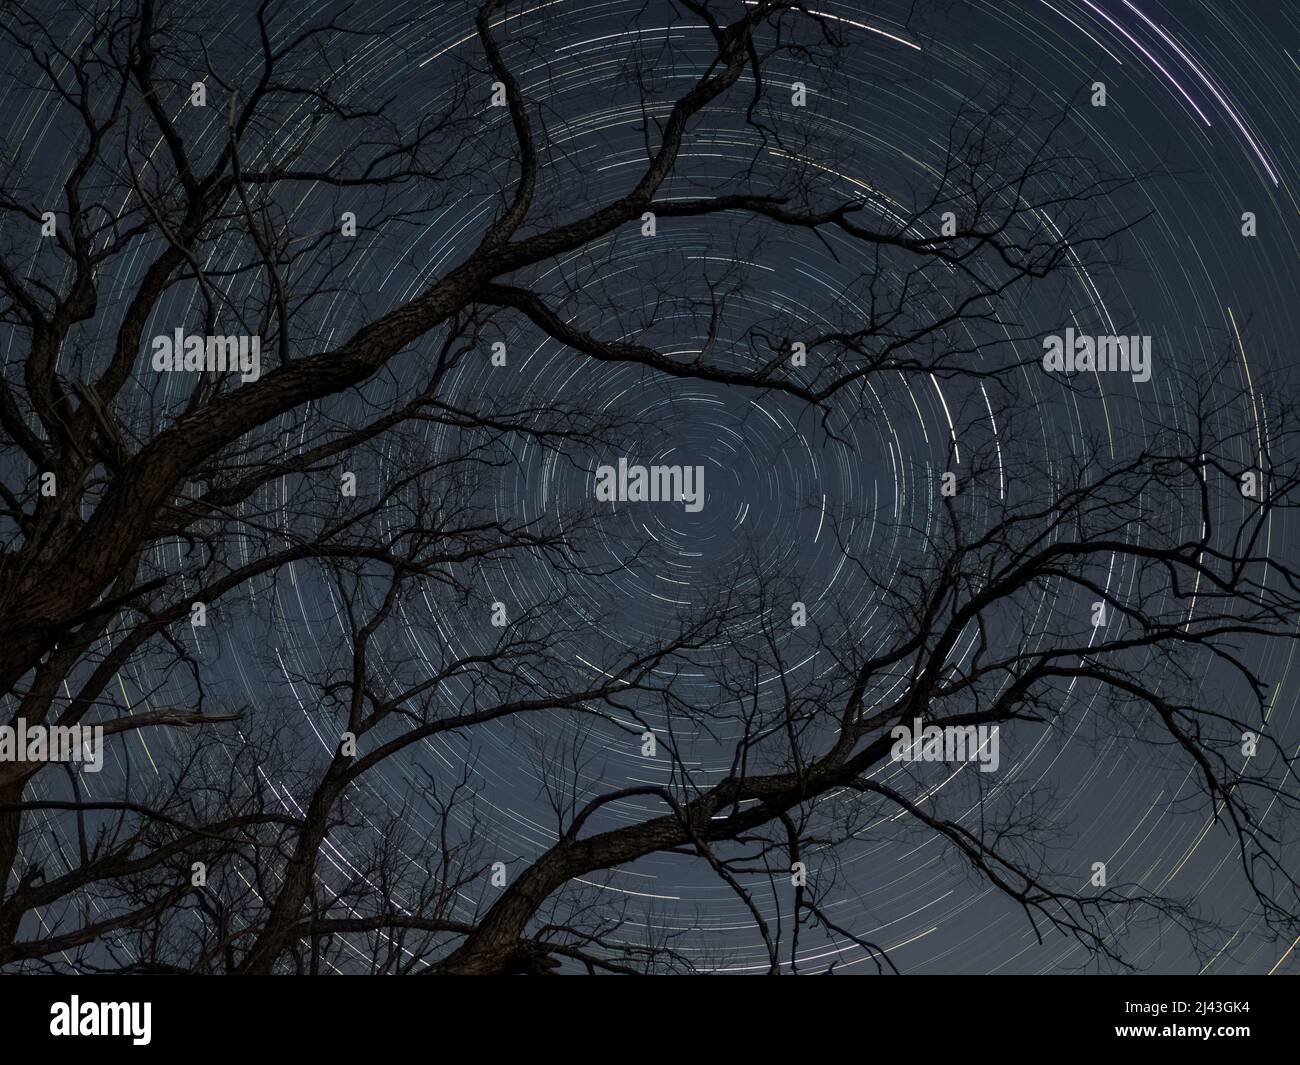 Silence of the stars. Movement of stars around pole star on north hemisphere against tree. Startrails on night sky, long exposure composition. Stock Photo